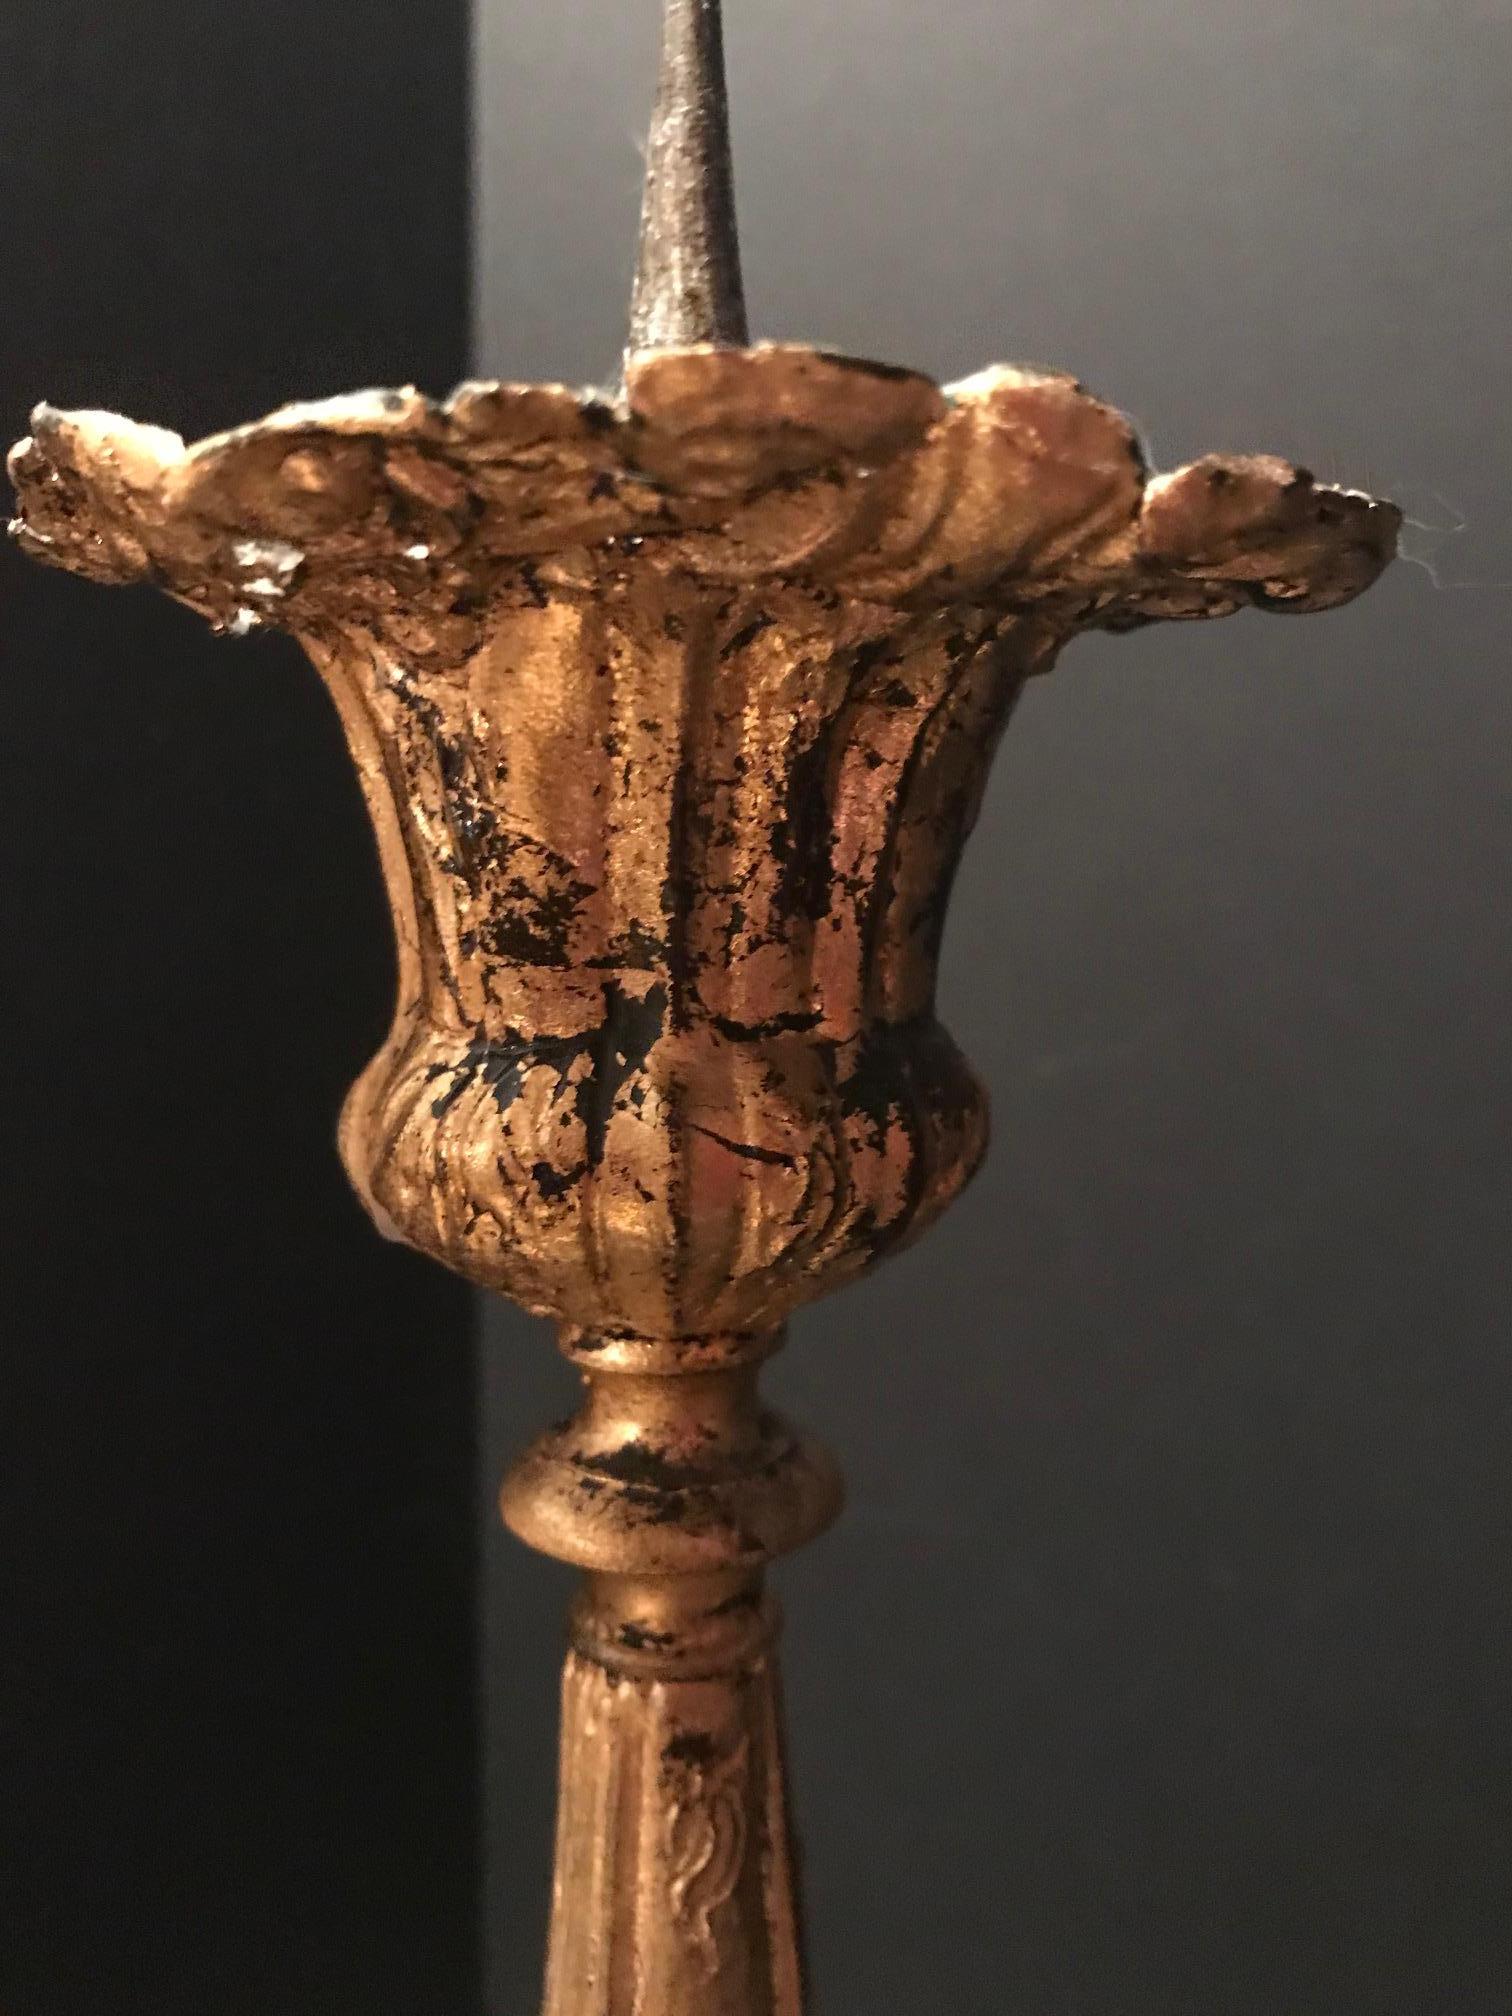 This pair of matching pricket candlesticks dates from the 17th century.
They are beautiful embossed with foliate and scroll motives. Age and
extensive use made a later regilding necessary. The bobeches show
some age related wear with a few breaks